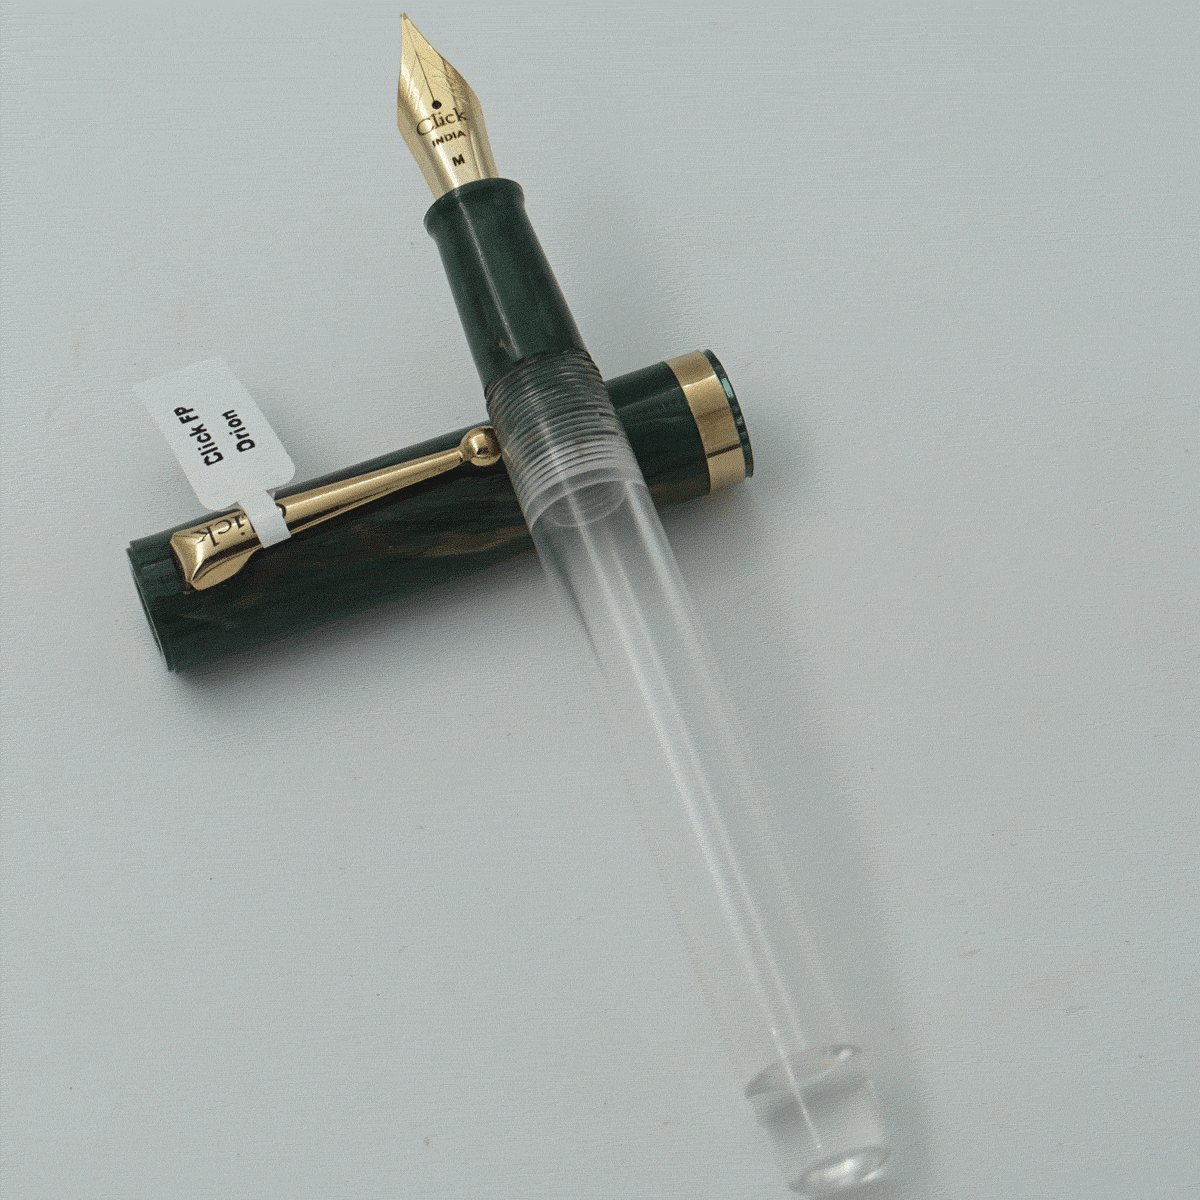 Click Orion Transparent Body With Green Color Marble Cap And Gold Clip No 35 GT Medium Nib Eye Dropper Model Fountain Pen (Nib Can be Customised) SKU 24135